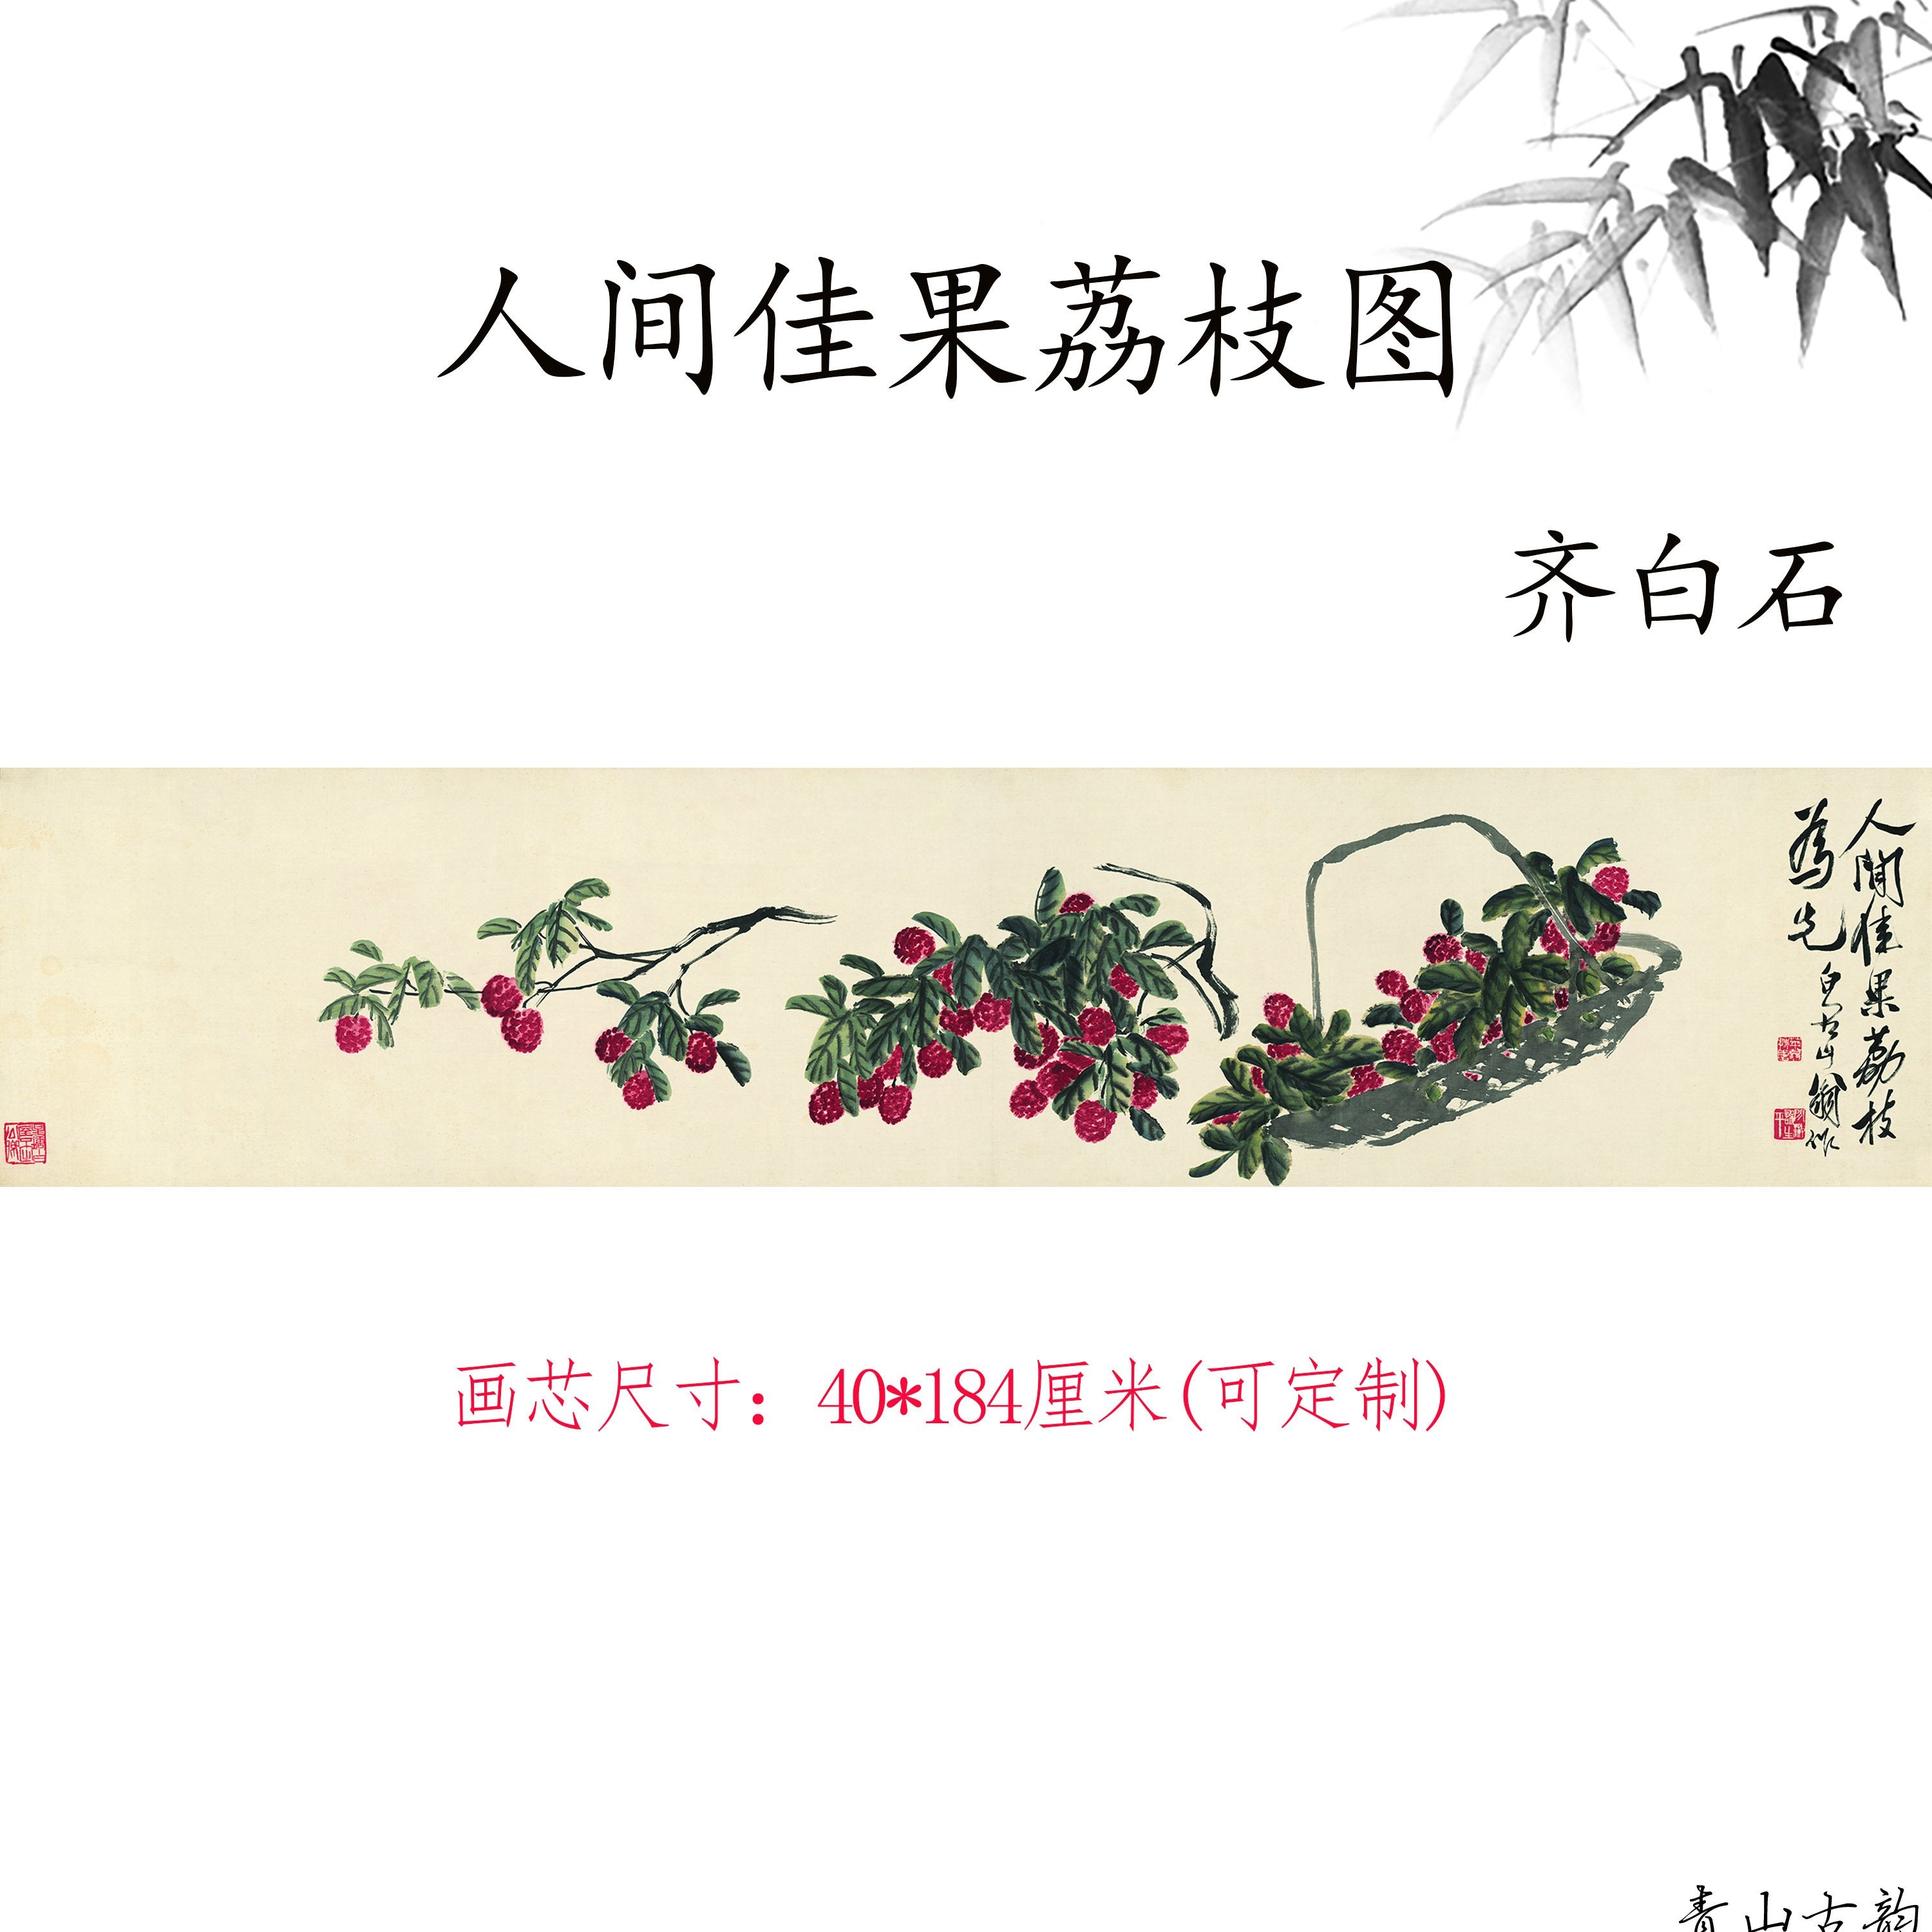 Chinese Antique Art Painting Qi Baishi Picture of Good Fruit Litchi in the World